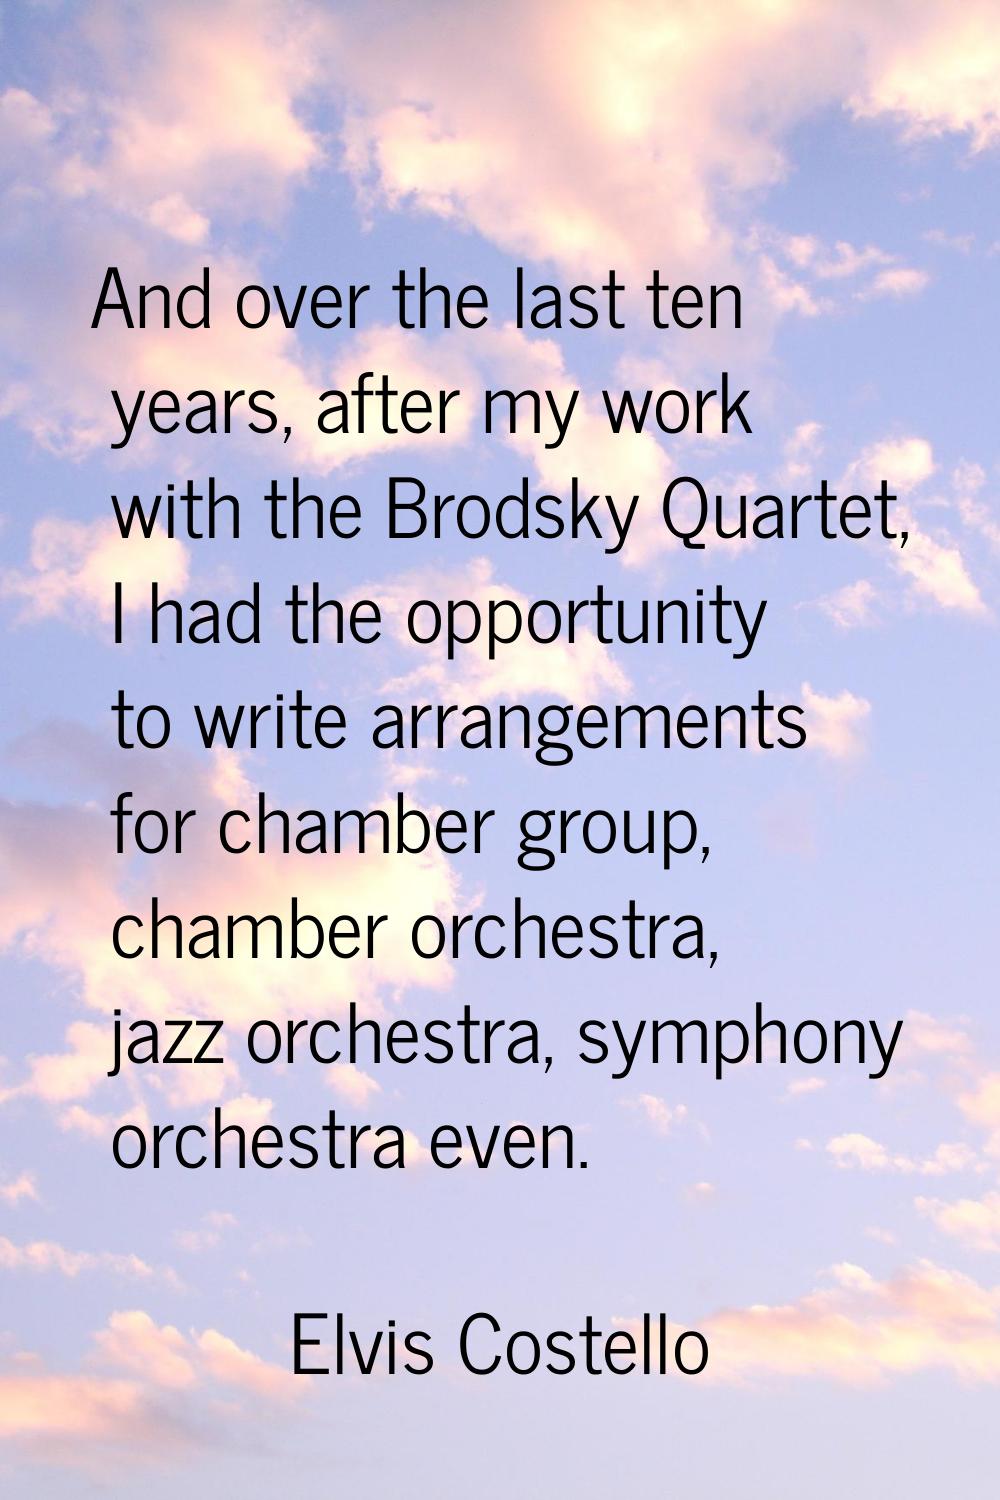 And over the last ten years, after my work with the Brodsky Quartet, I had the opportunity to write